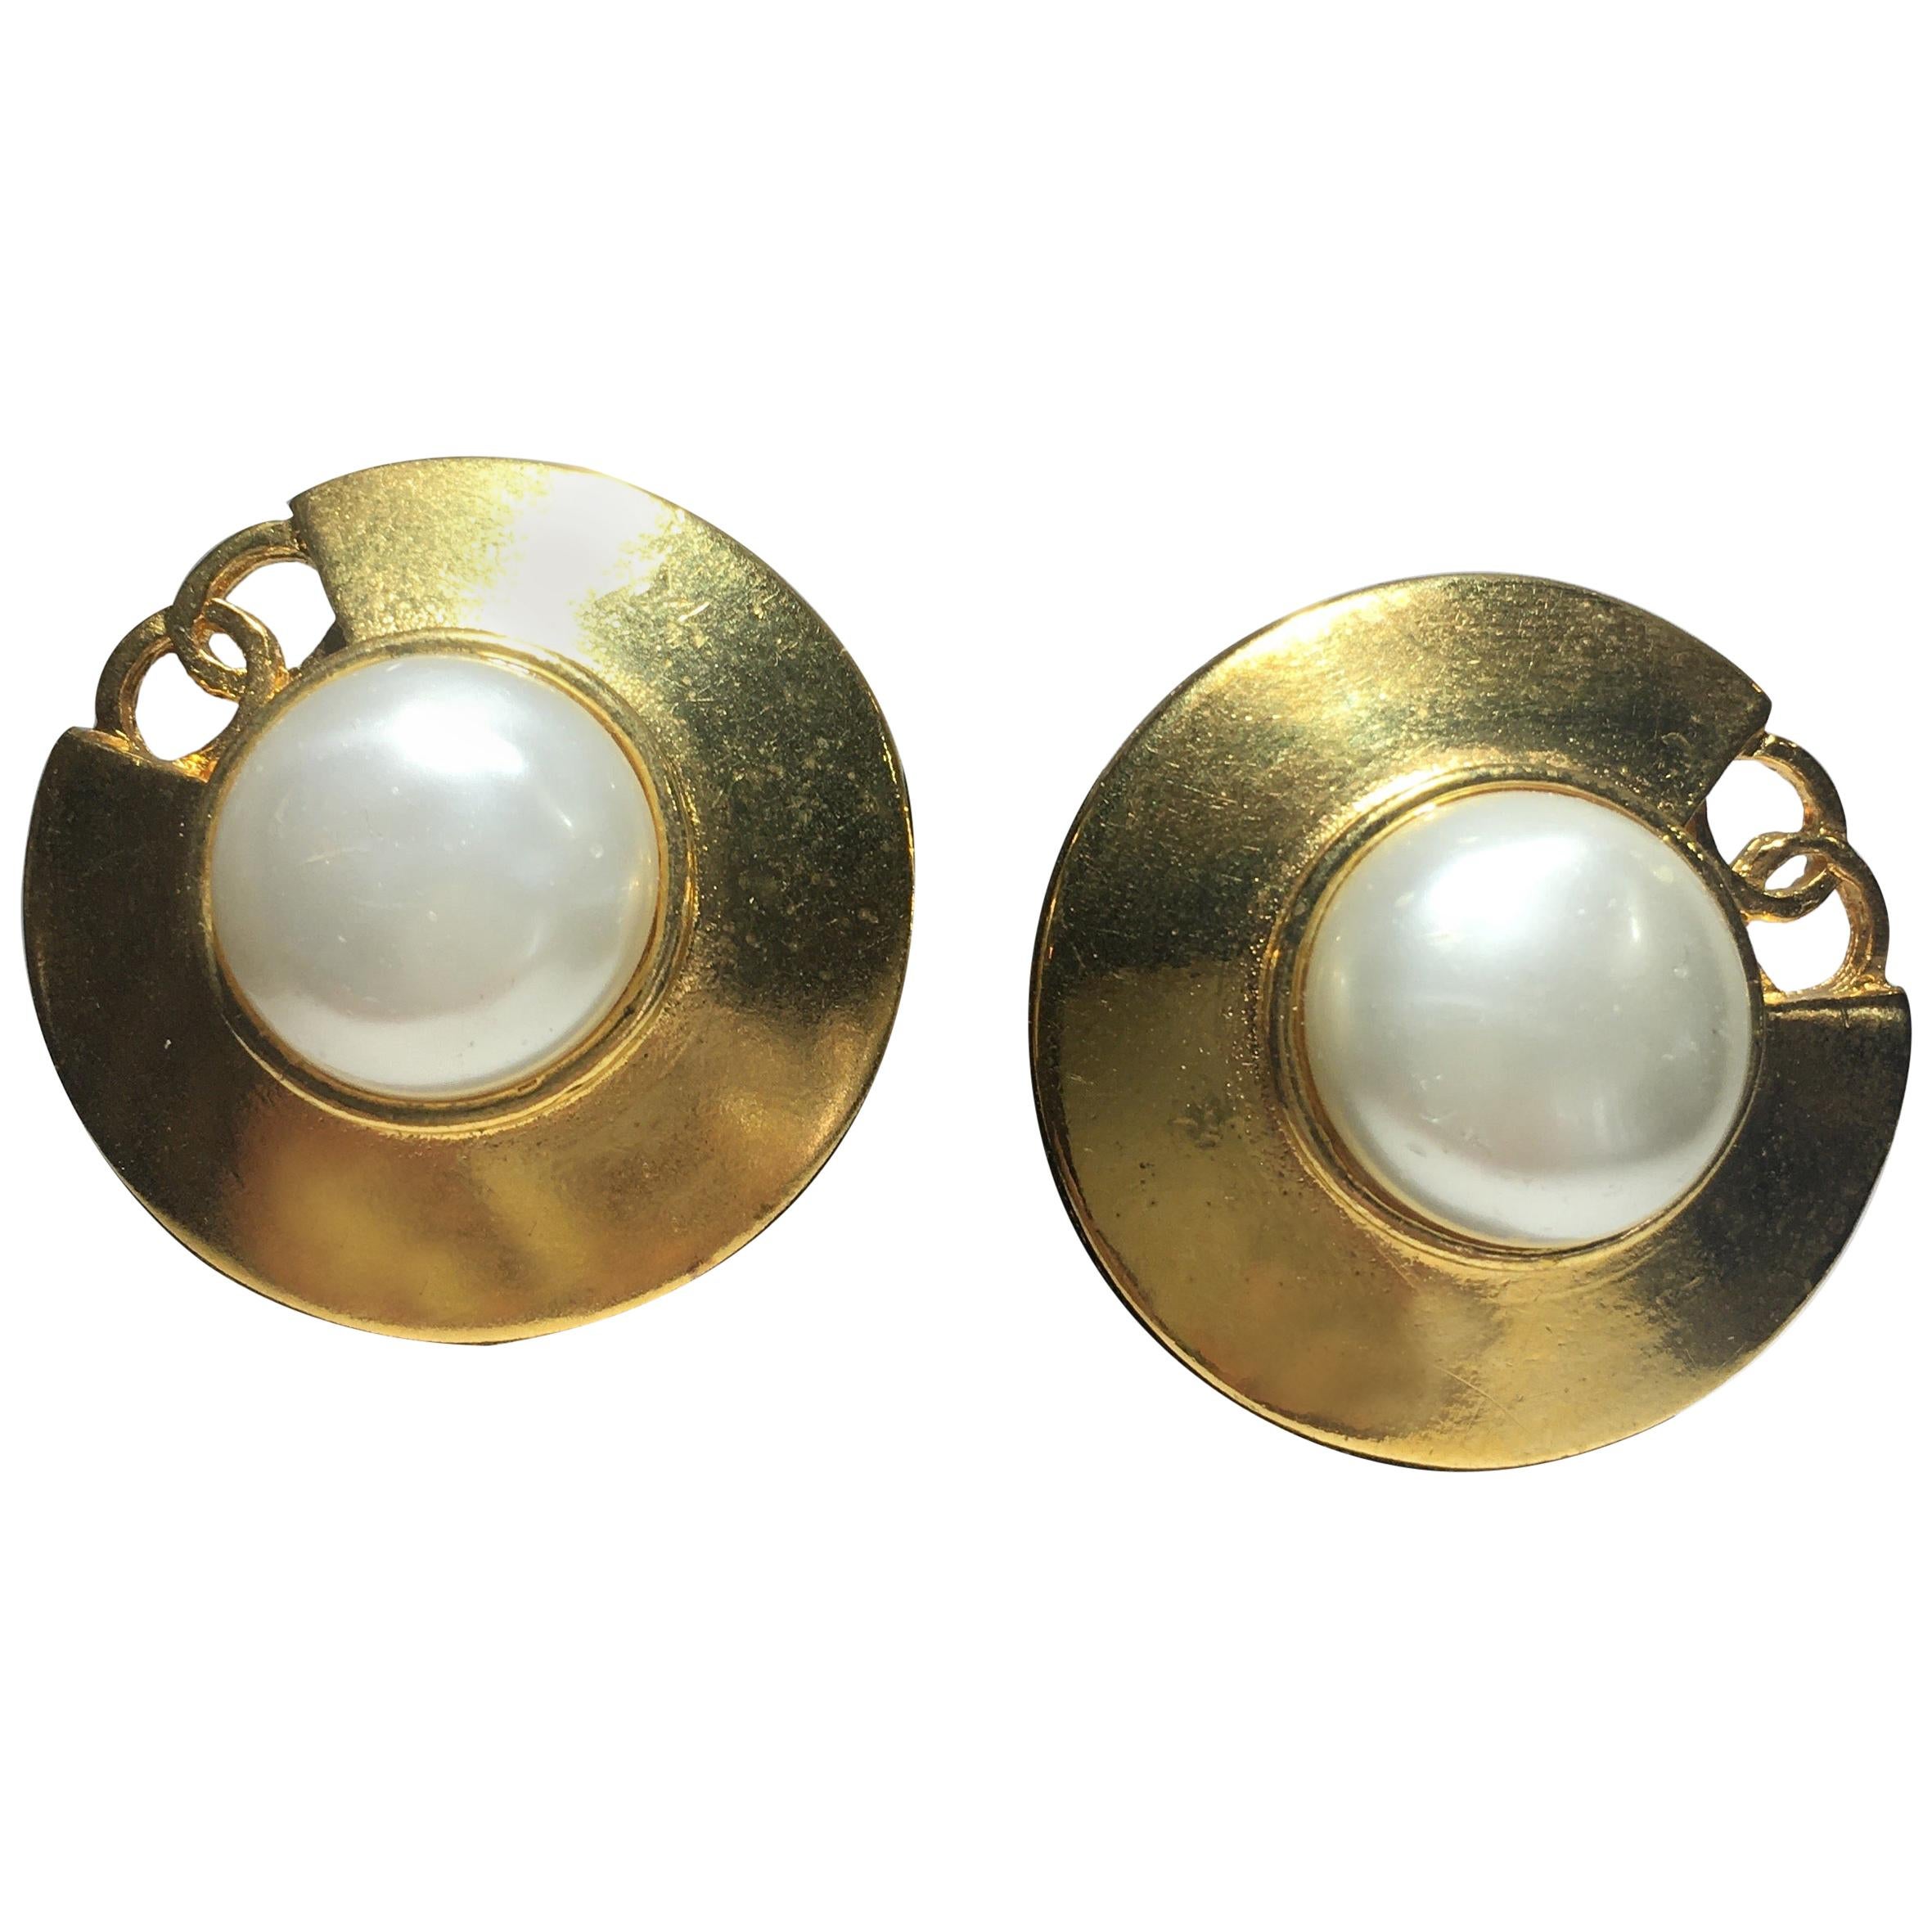 Chanel Gold And Mobe Pearl Earings With Signature Interlocking CC.  Great Scale.